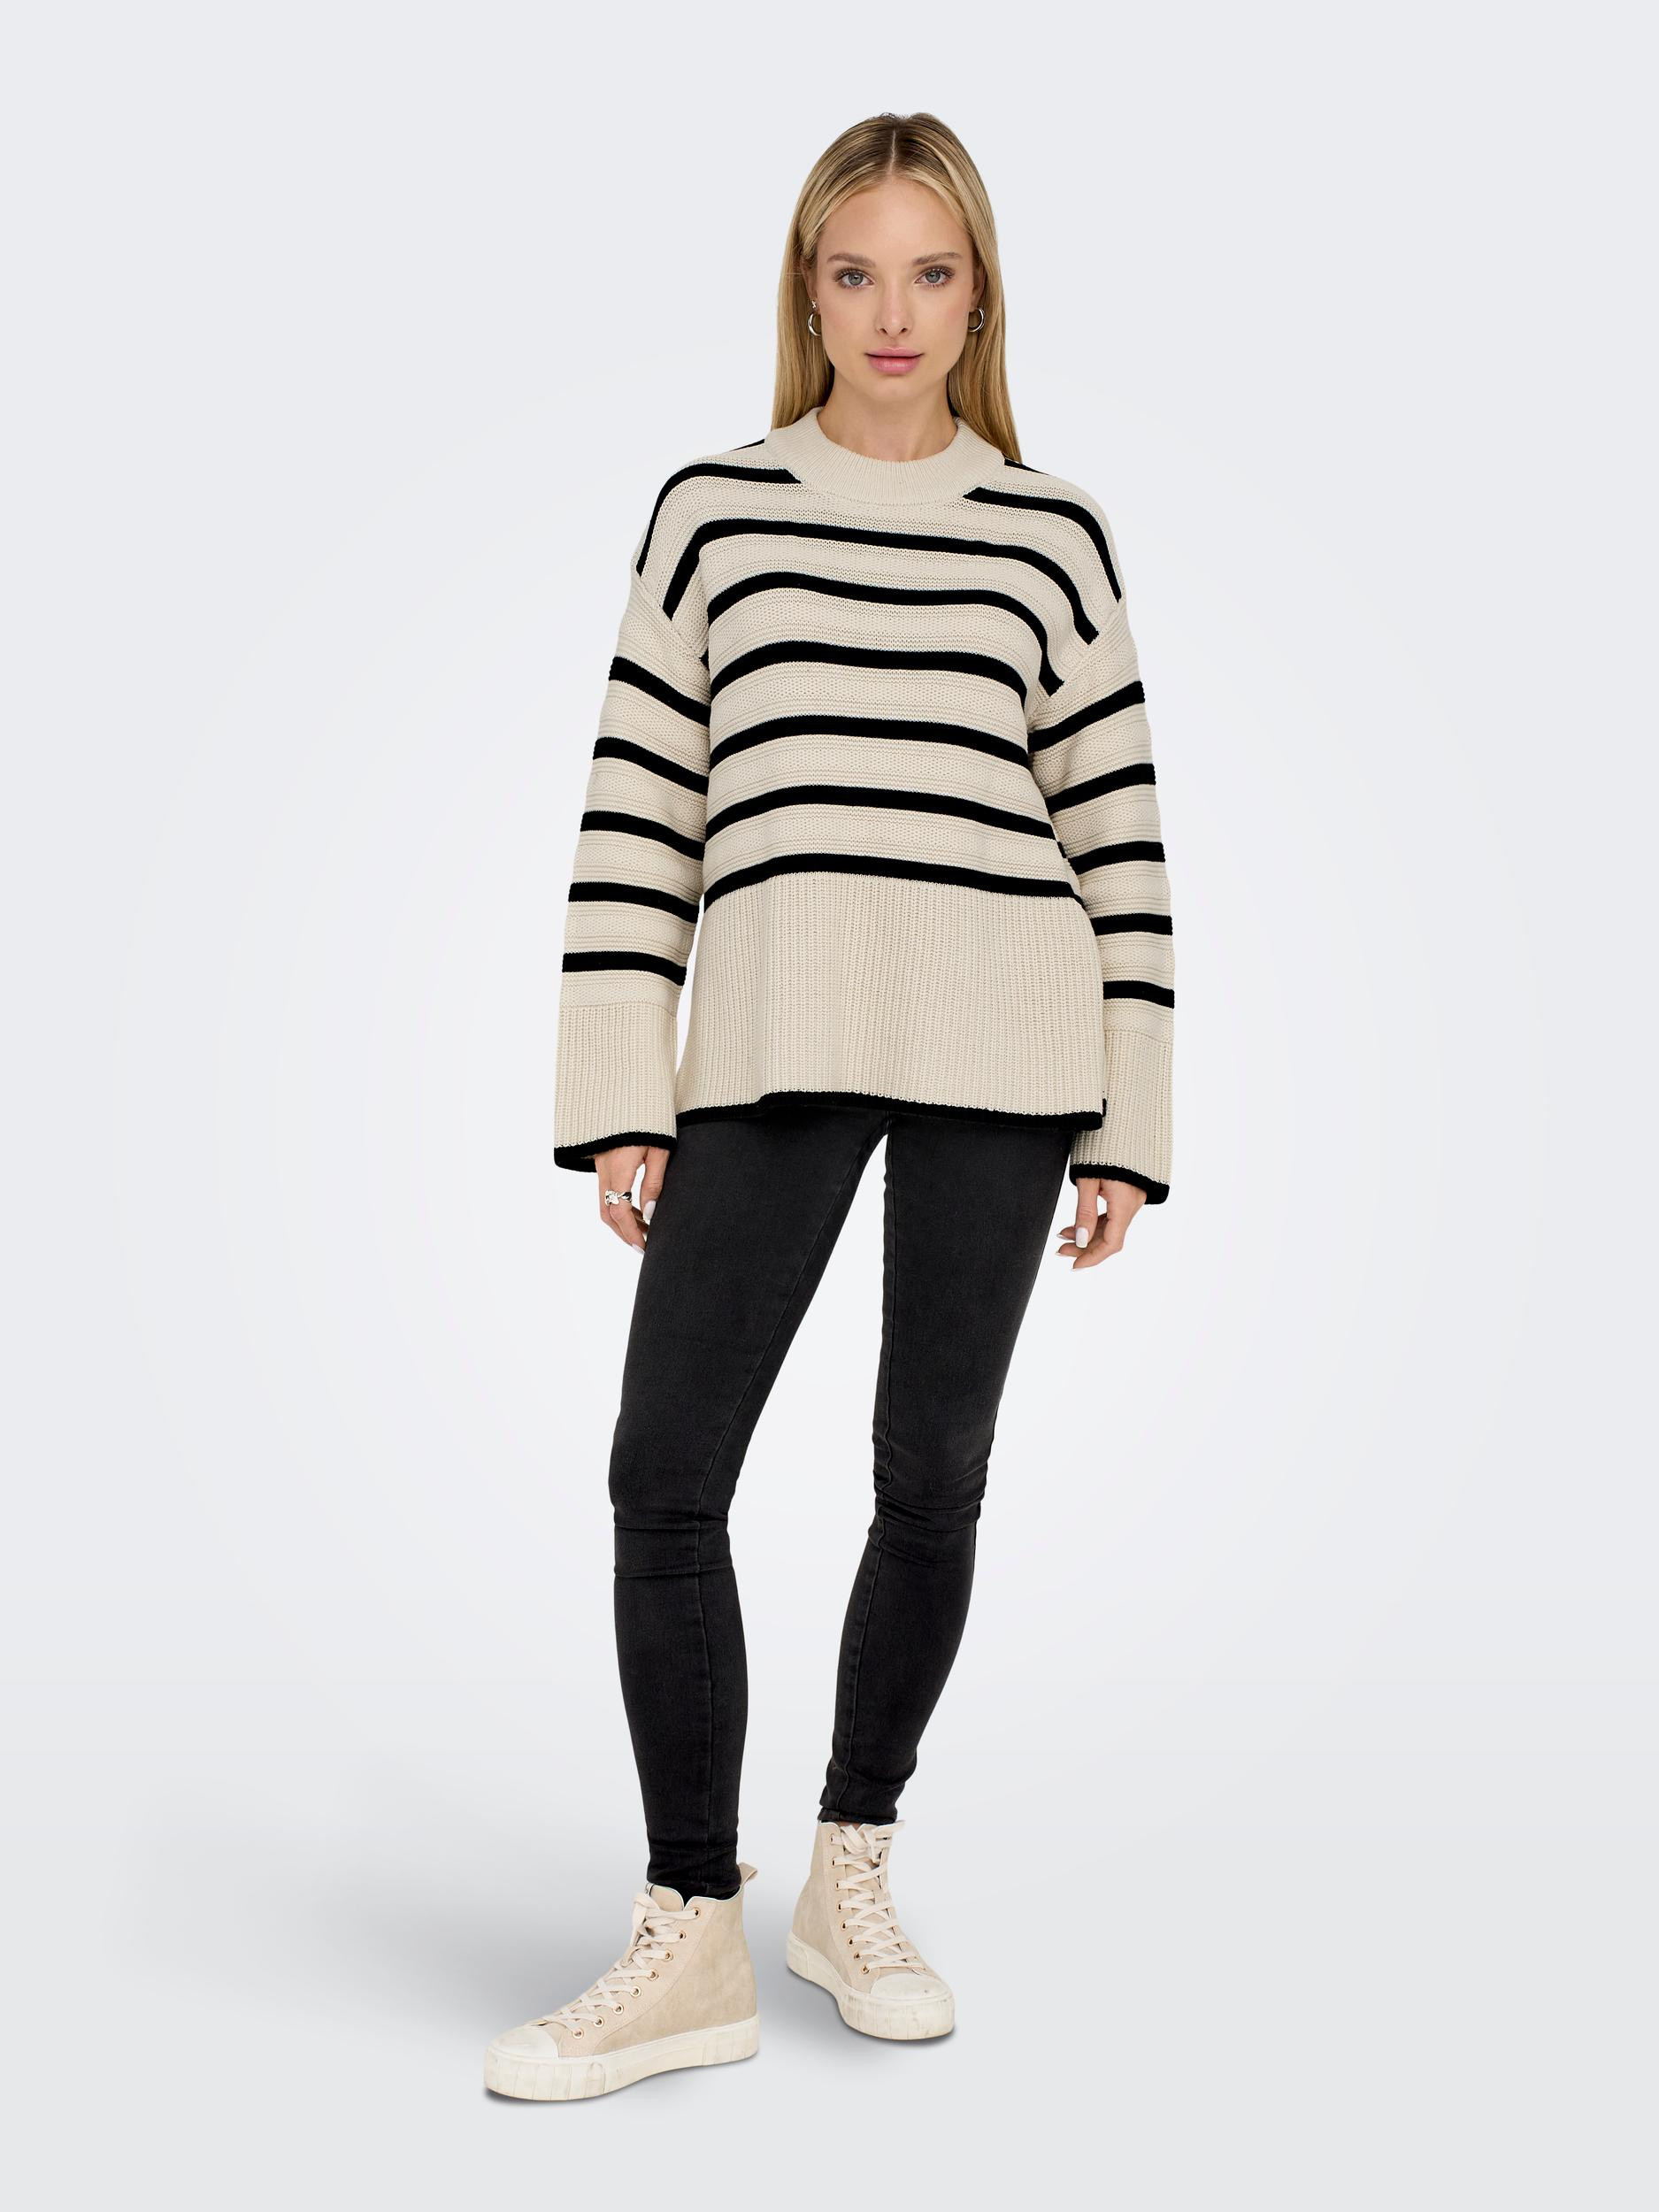 Only - Striped cotton blend sweater, Beige, large image number 2